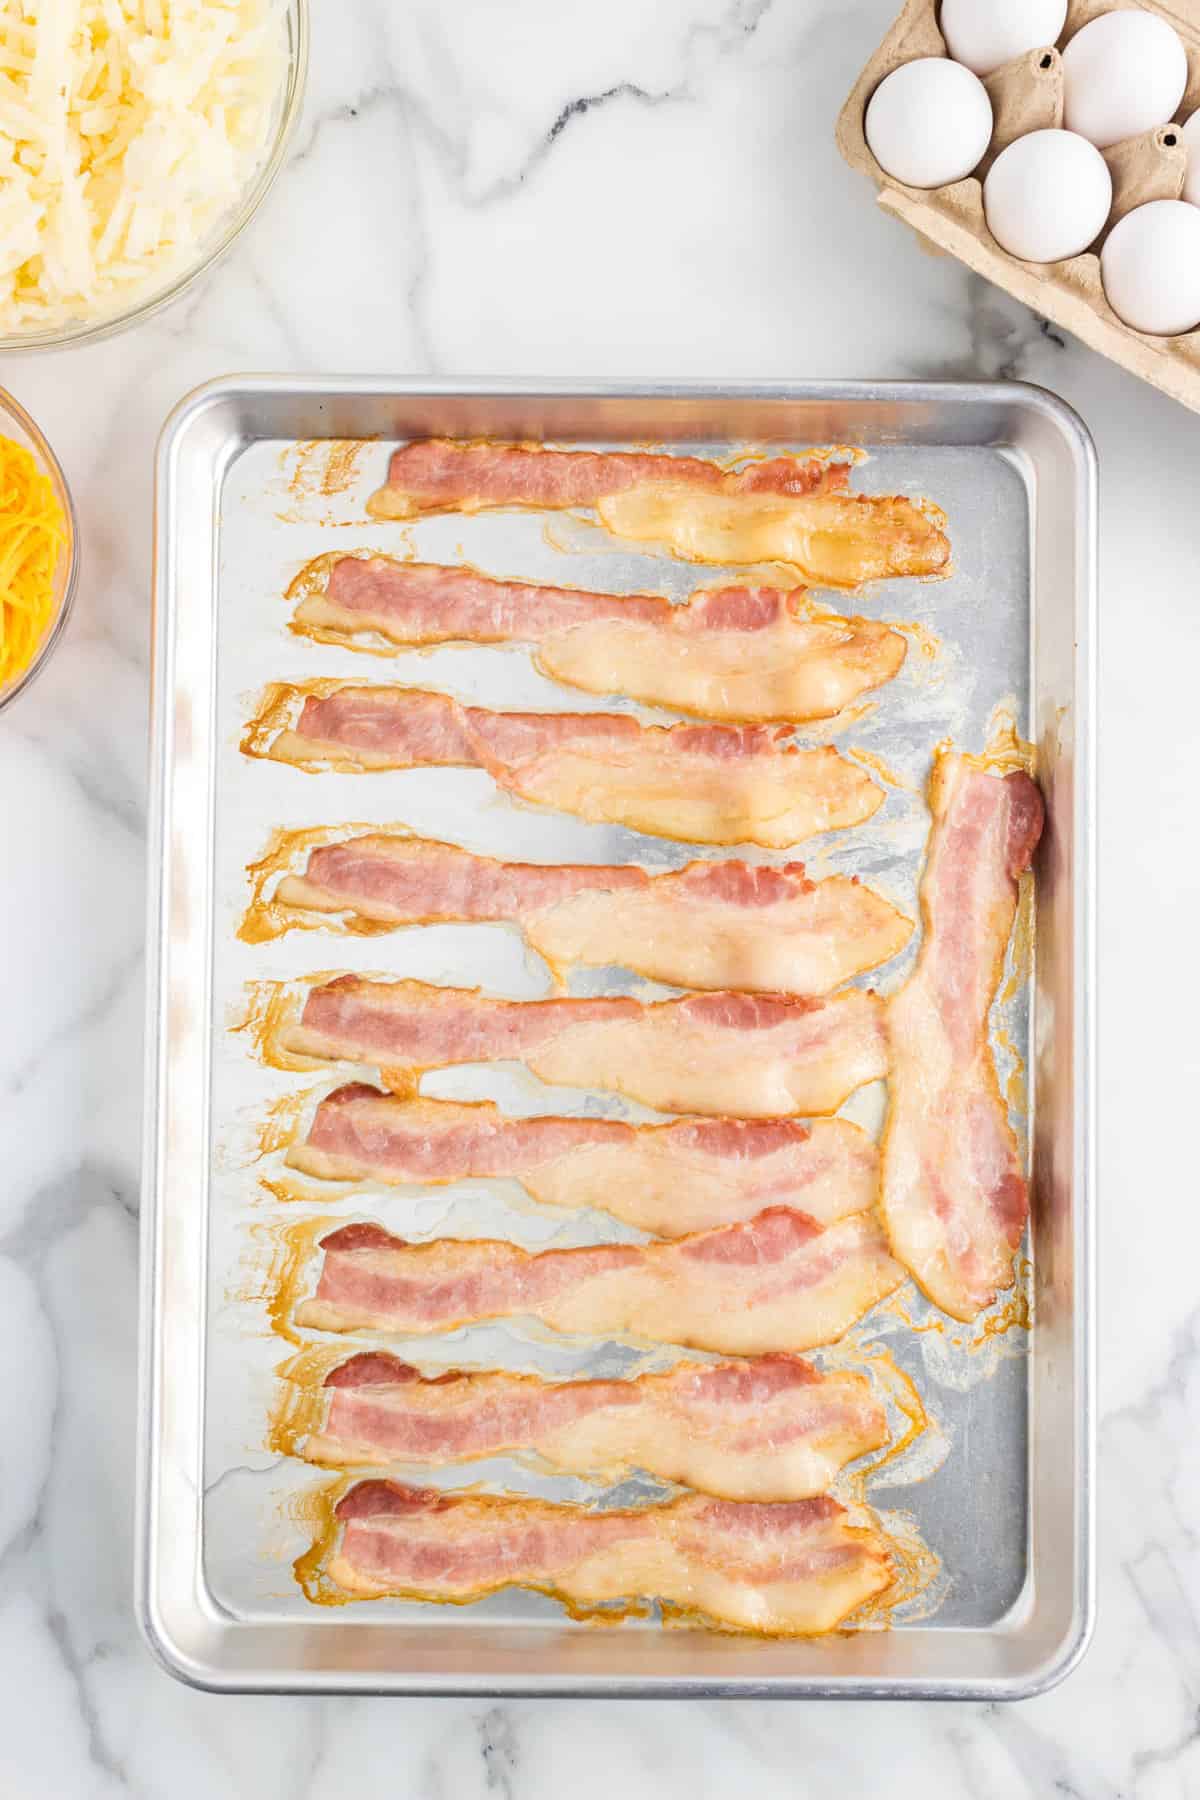 Cooked Bacon for Sheet Pan Breakfast Recipe